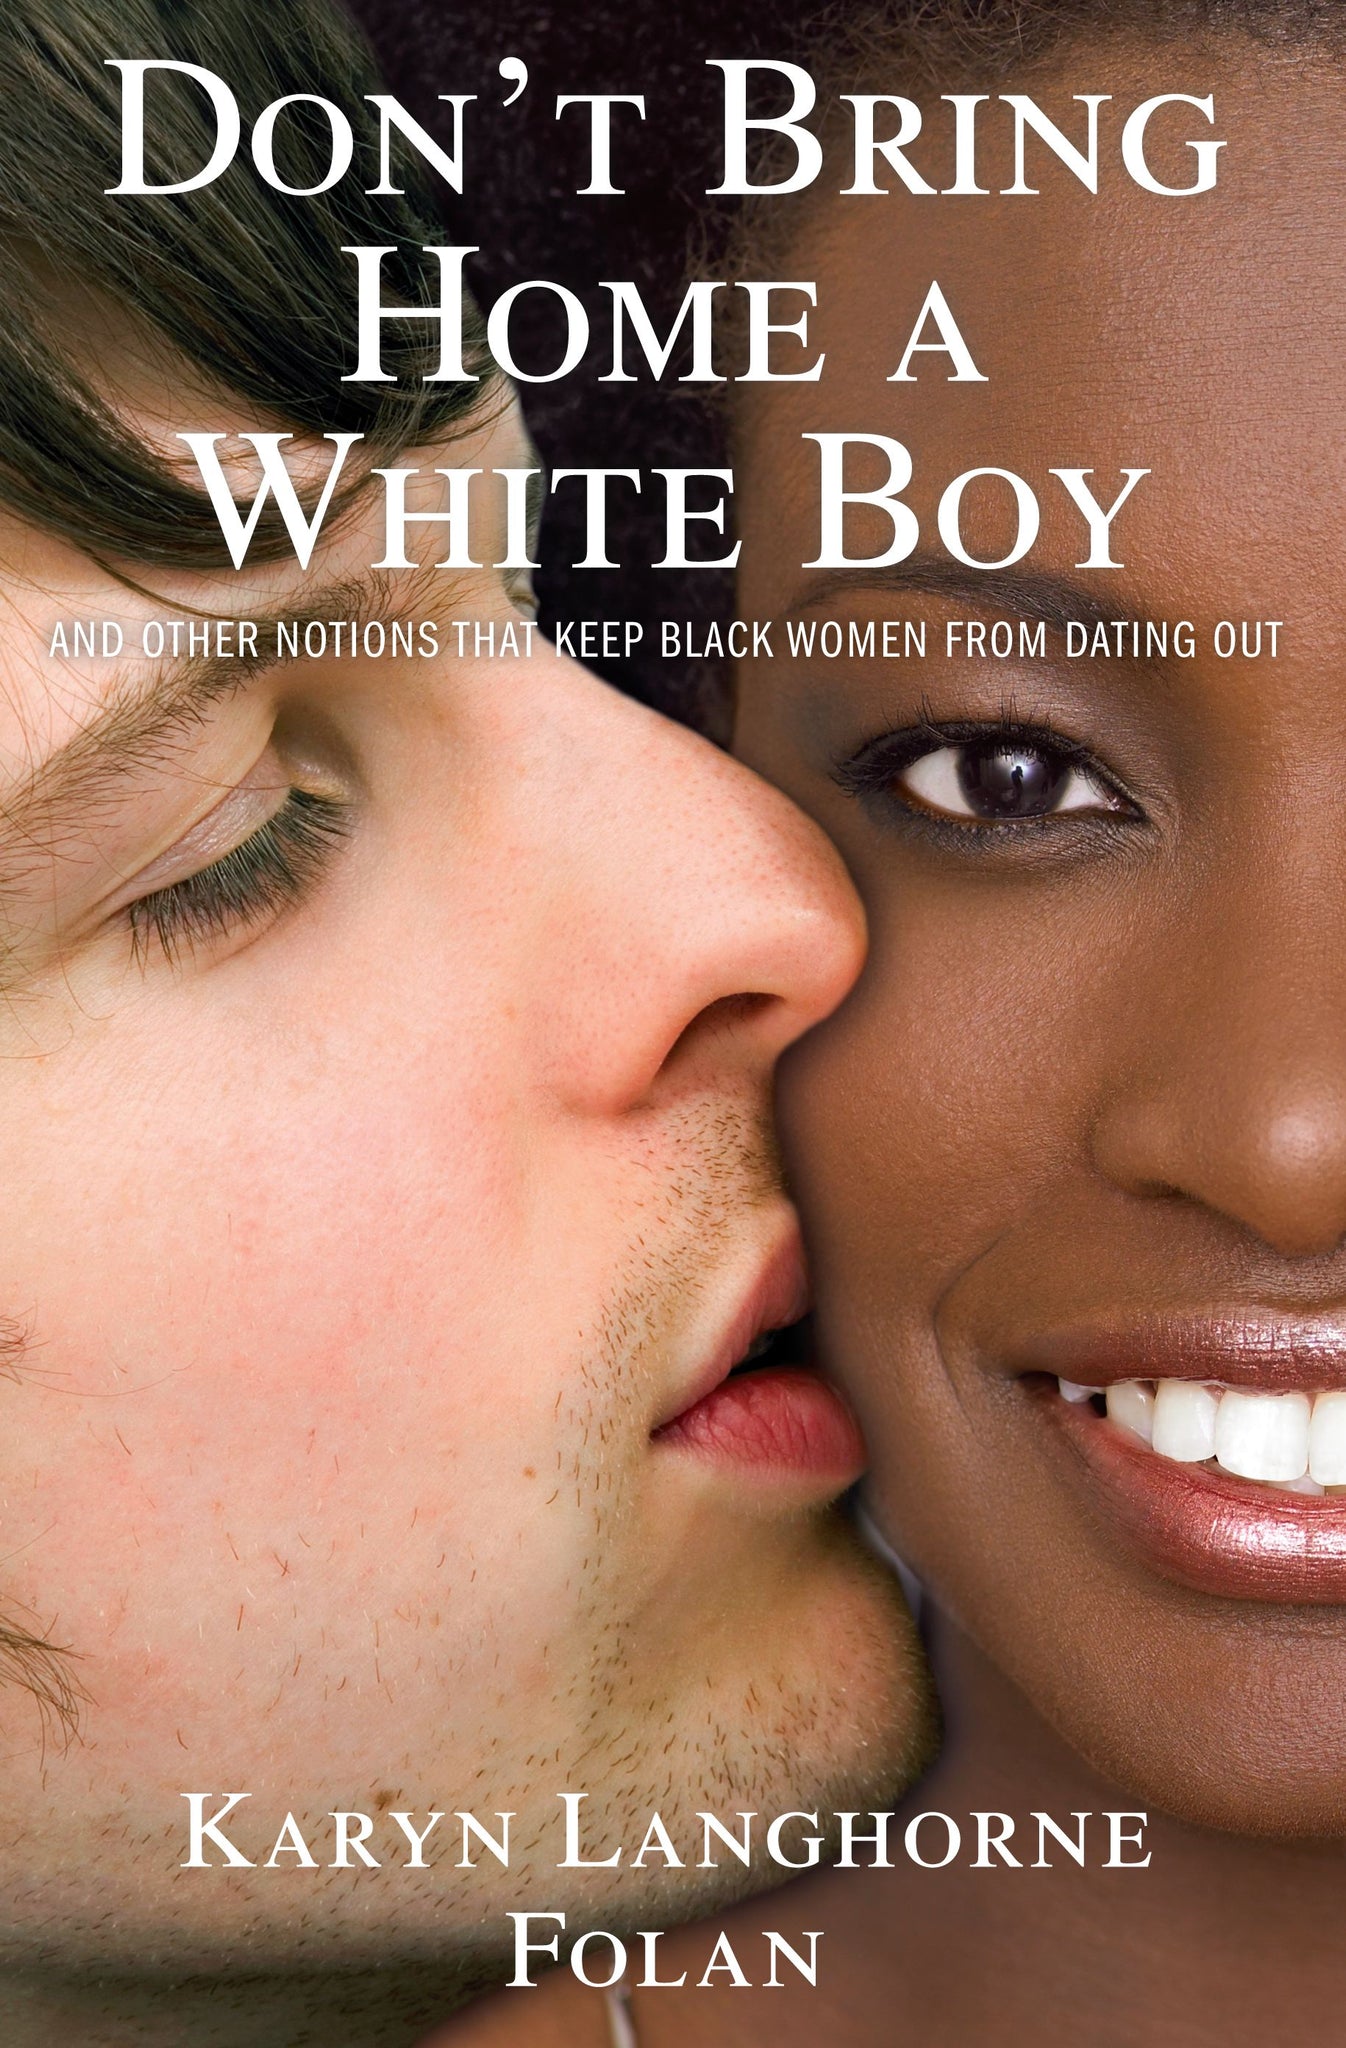 Don't Bring Home a White Boy : And Other Notions that Keep Black Women From Dating Out